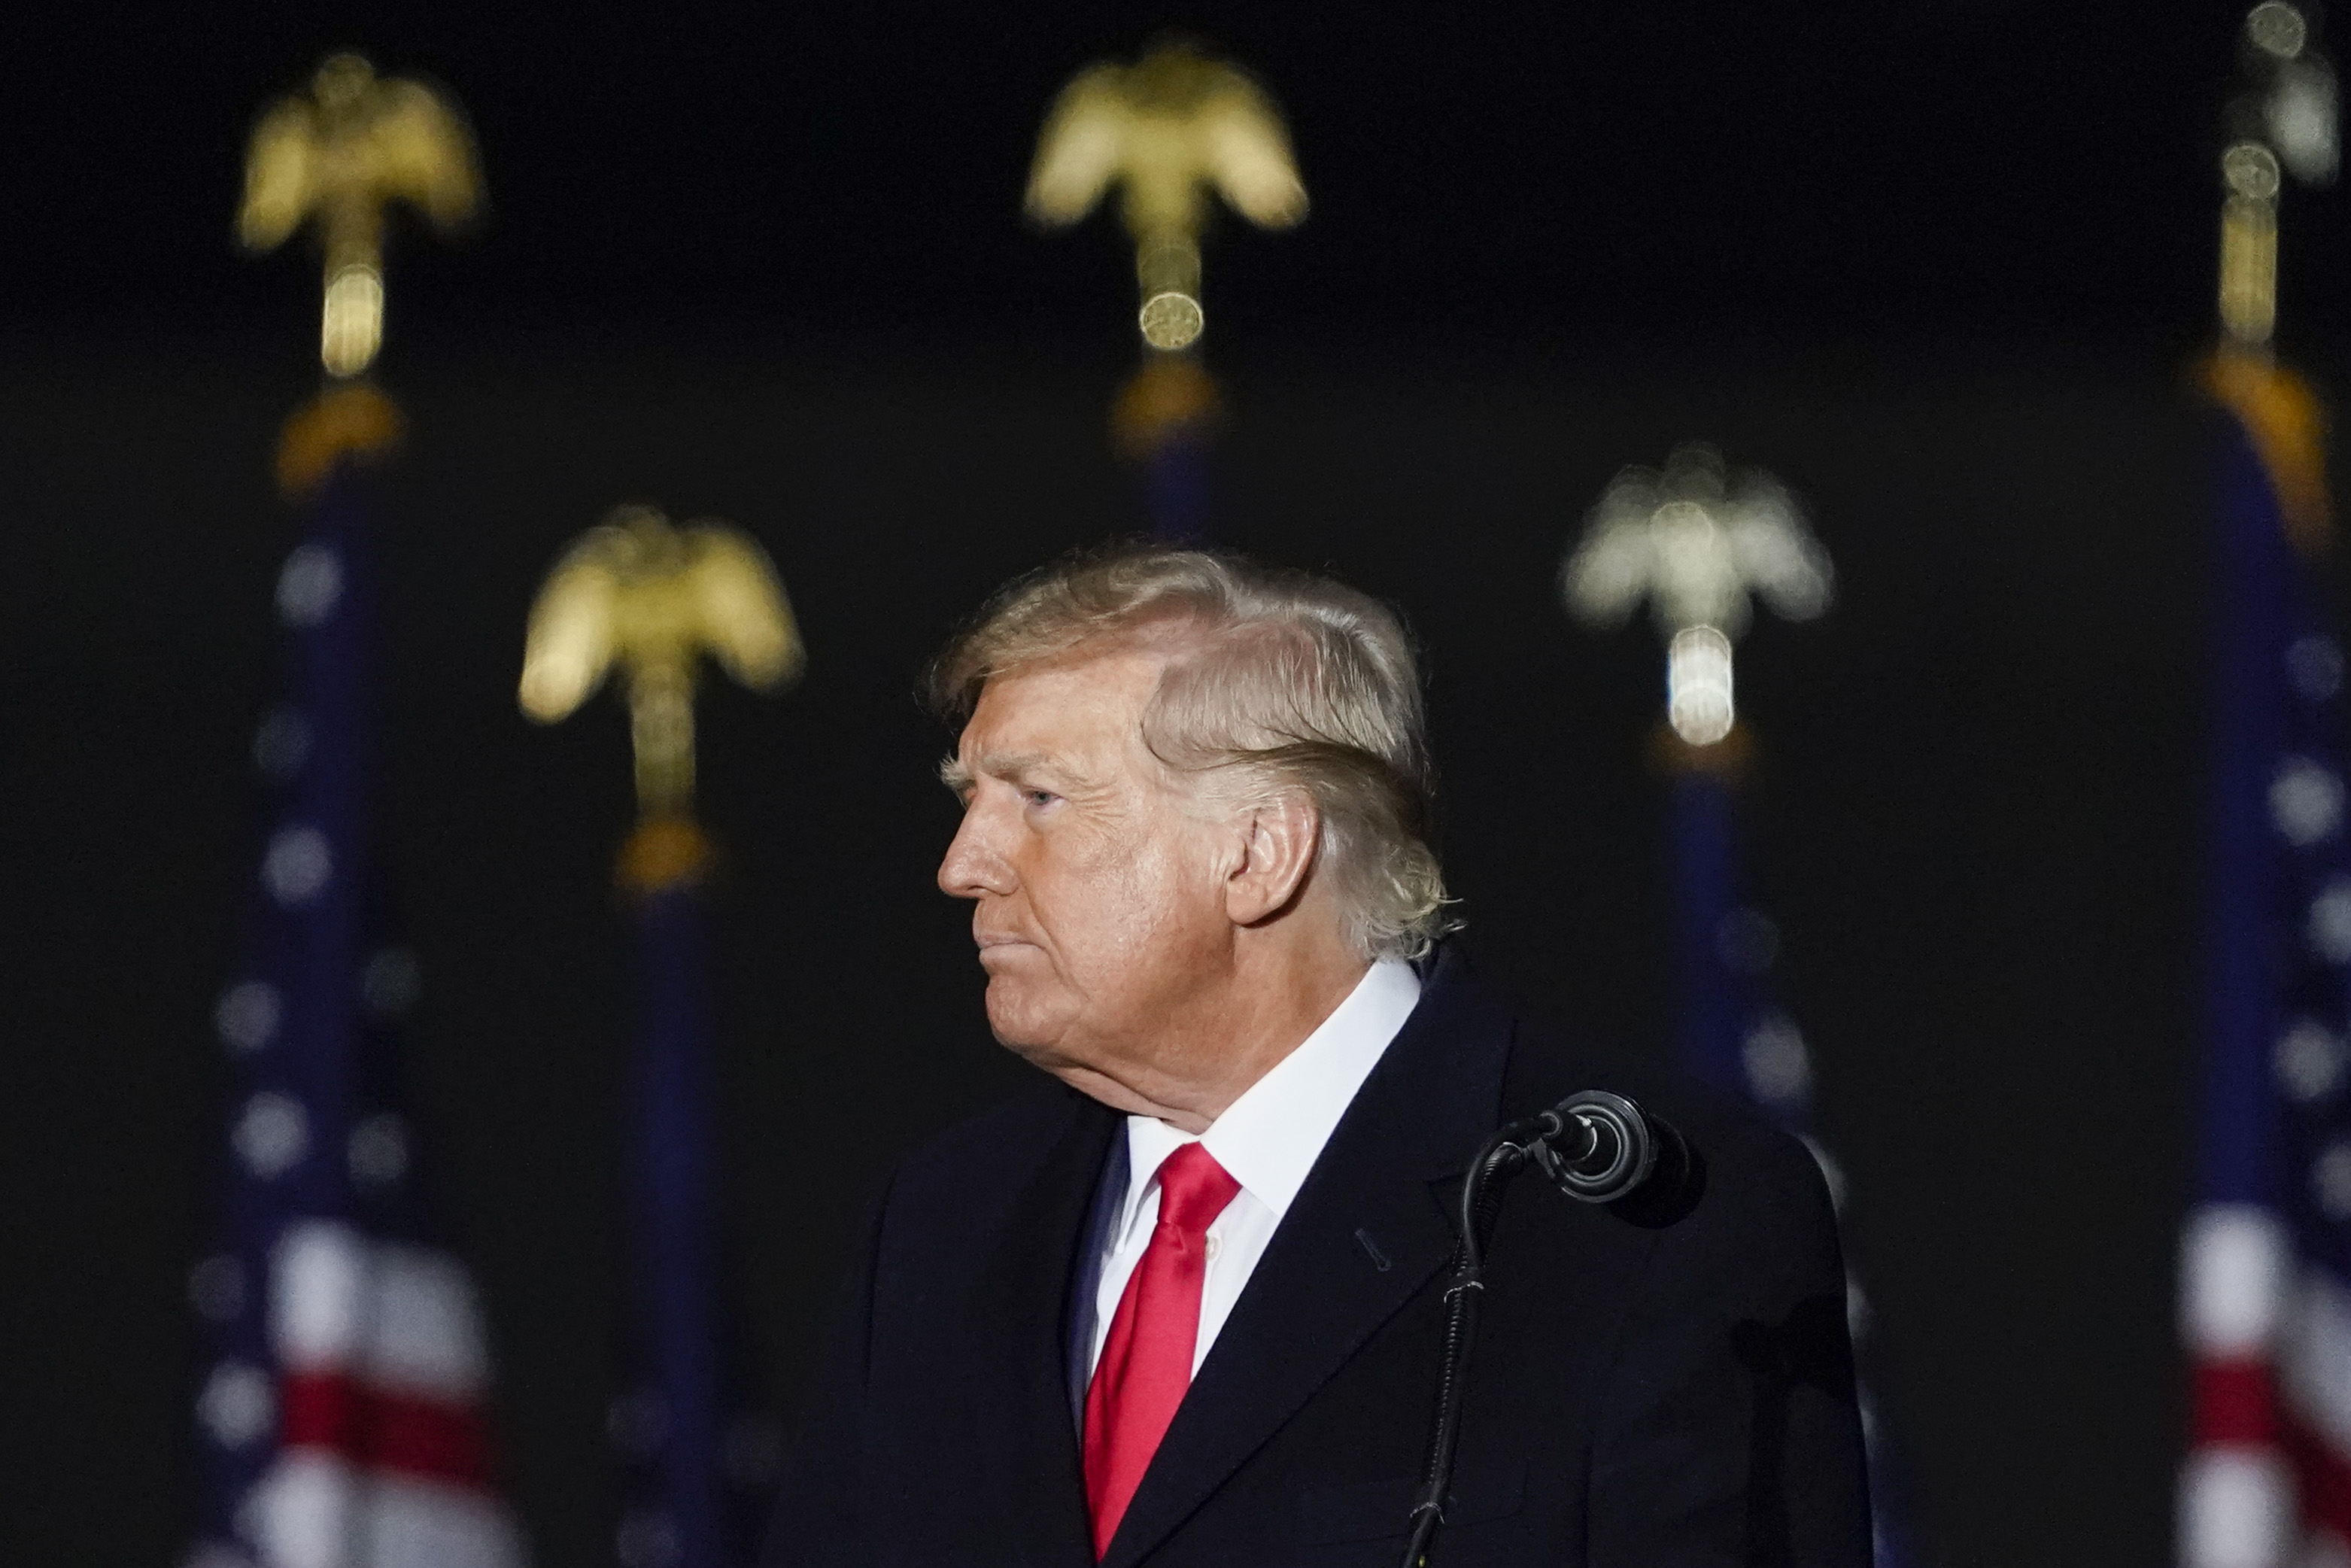 Trump in profile facing left, with American flags in the background. 